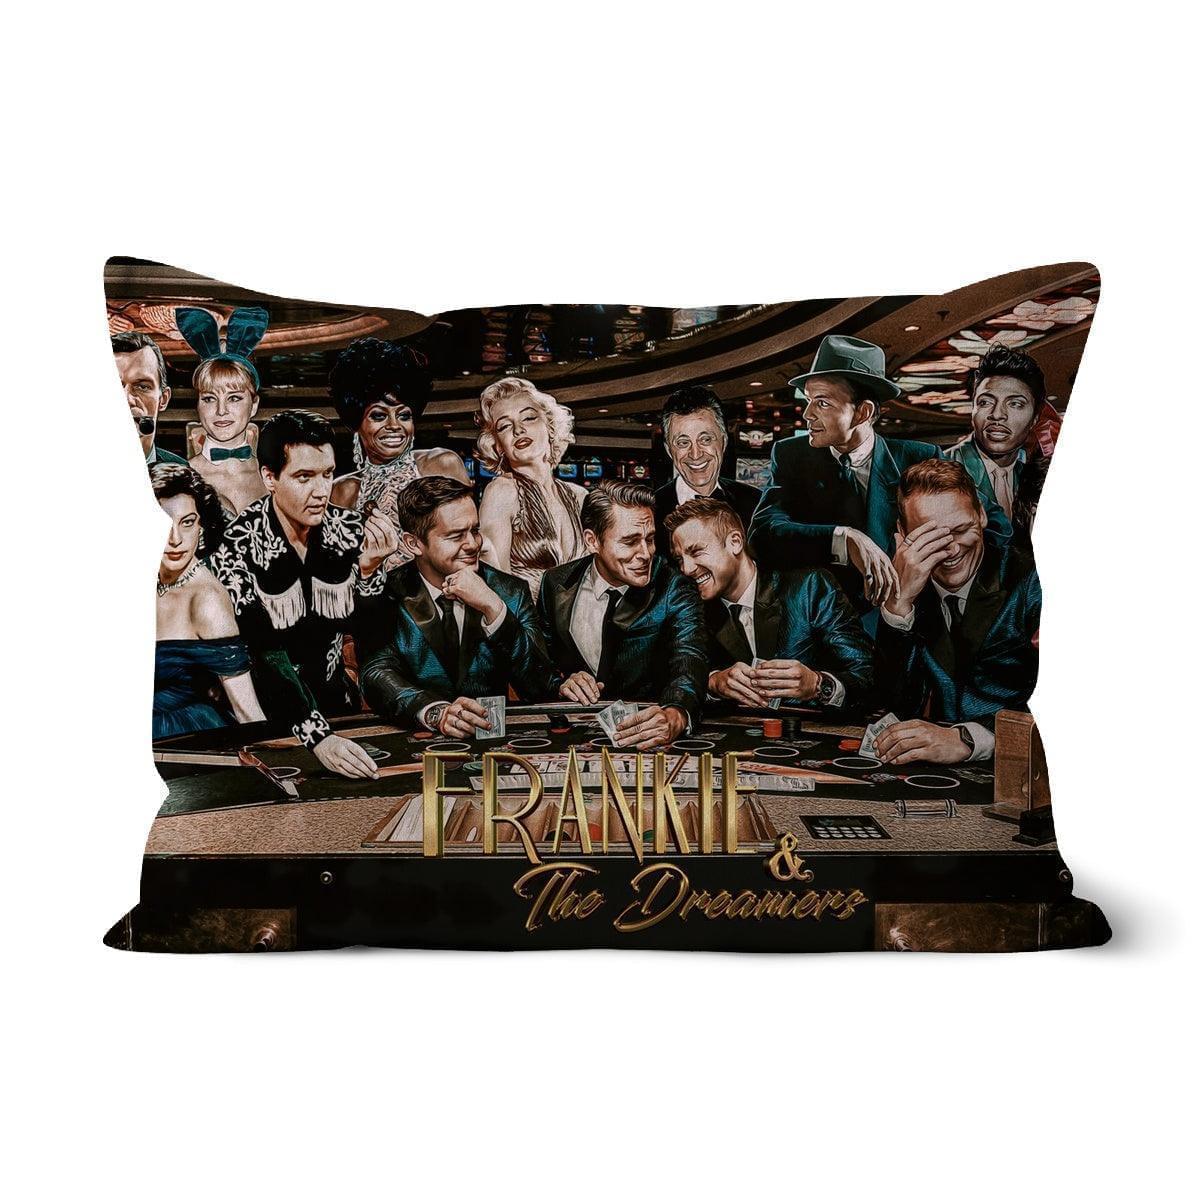 Frankie And The Dreamers Casino 2 Cushion | Homeware Linen 19"x13"